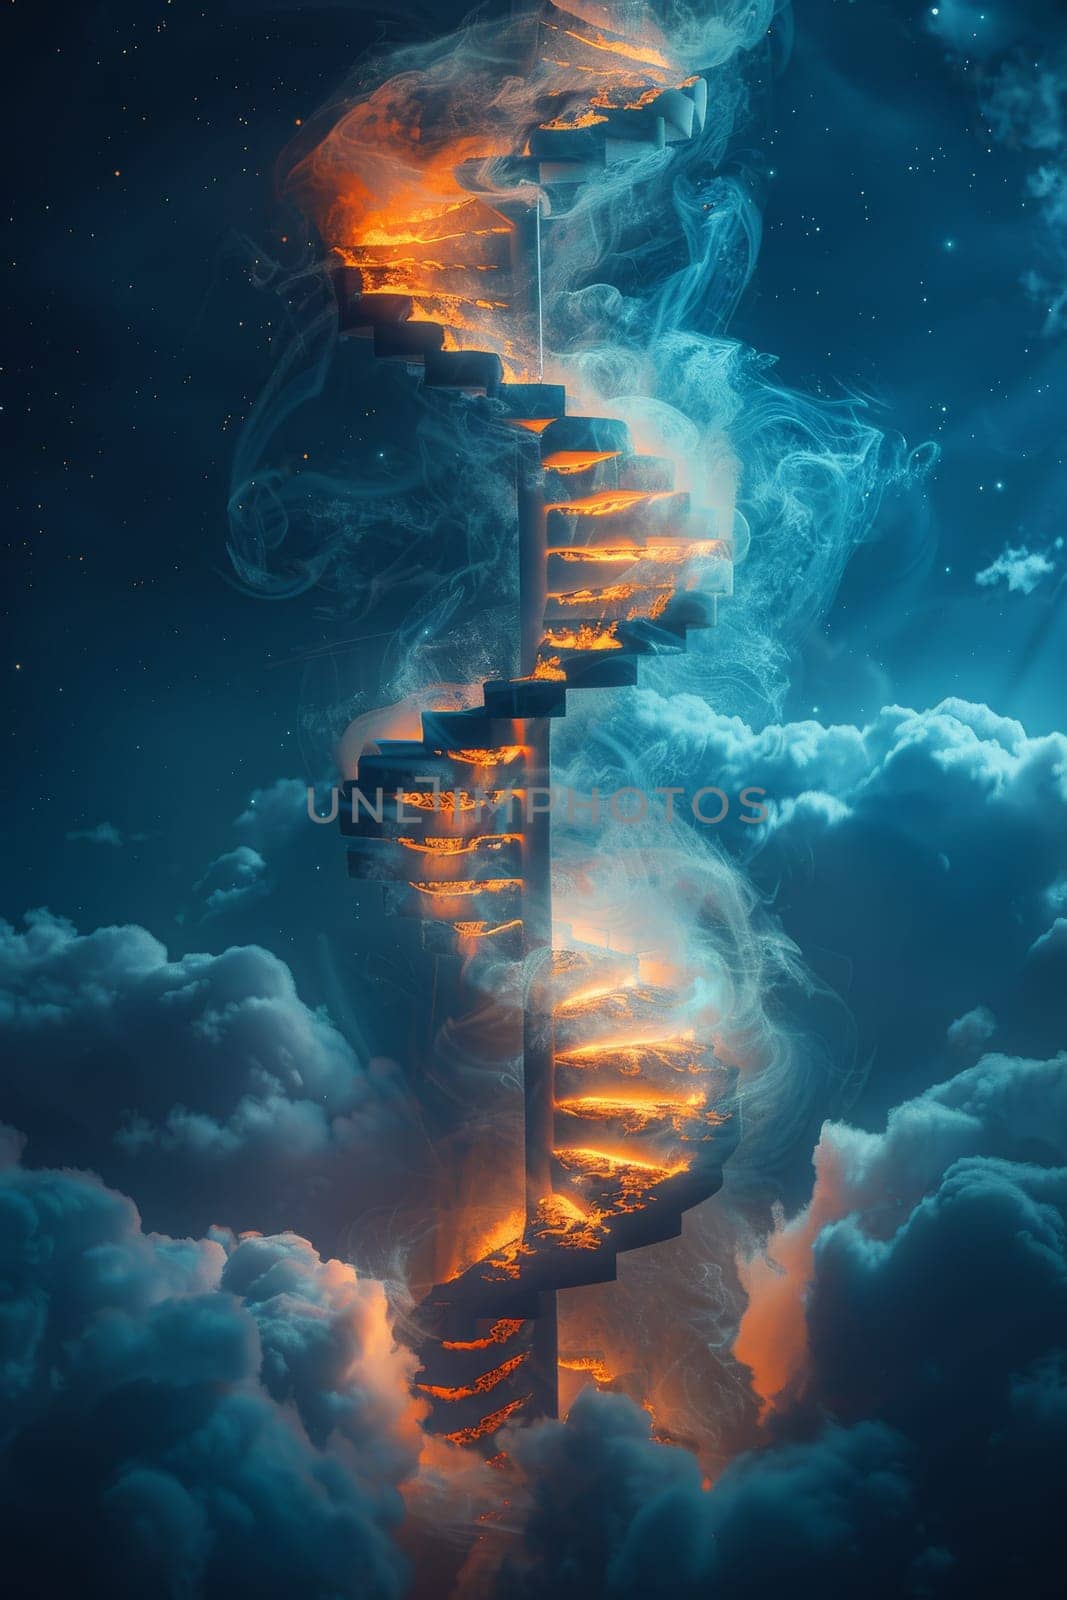 A staircase of fire is shown in the sky, with clouds in the background. The image has a dreamy, surreal quality to it, as if the staircase is leading to a different world